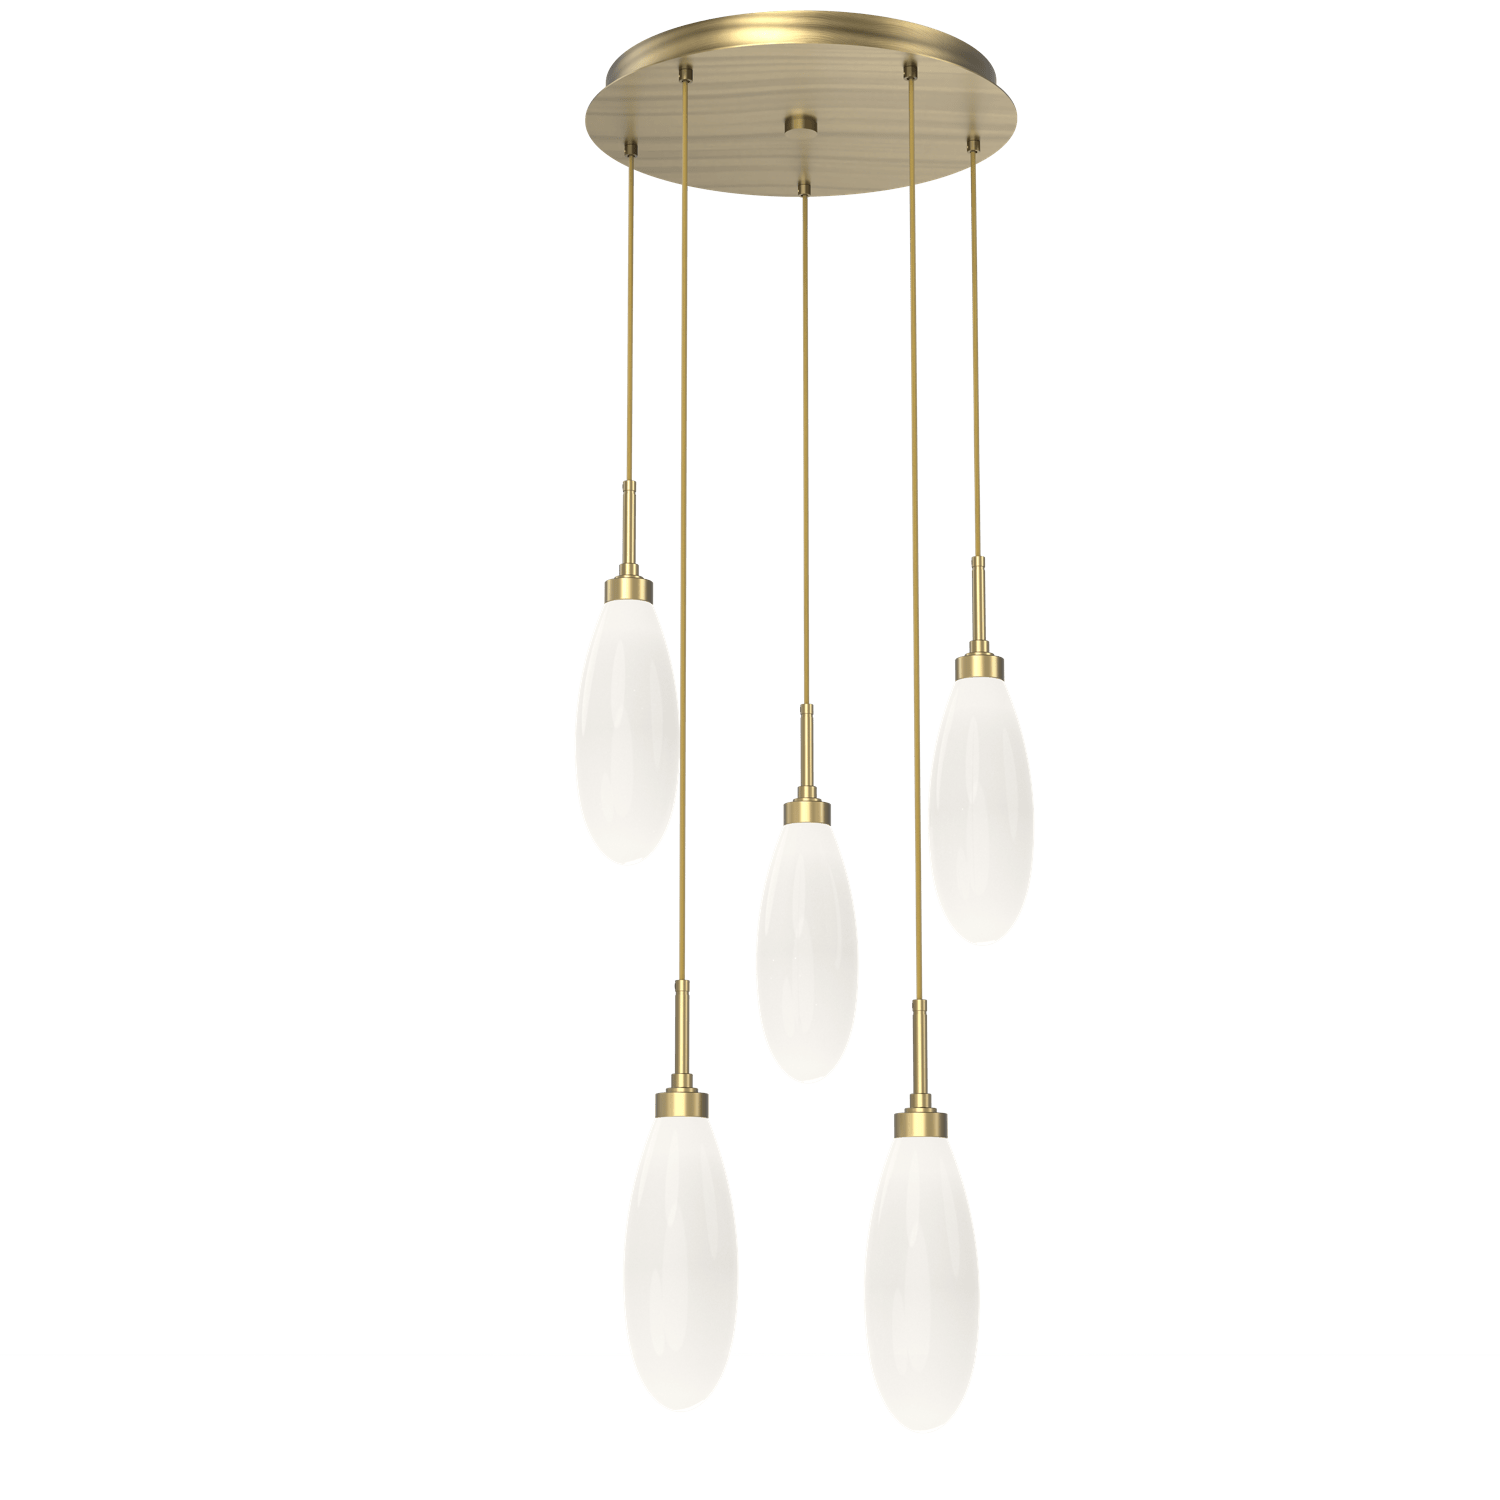 CHB0071-05-HB-WL-LL-Hammerton-Studio-Fiori-5-light-round-pendant-chandelier-with-heritage-brass-finish-and-opal-white-glass-shades-and-LED-lamping